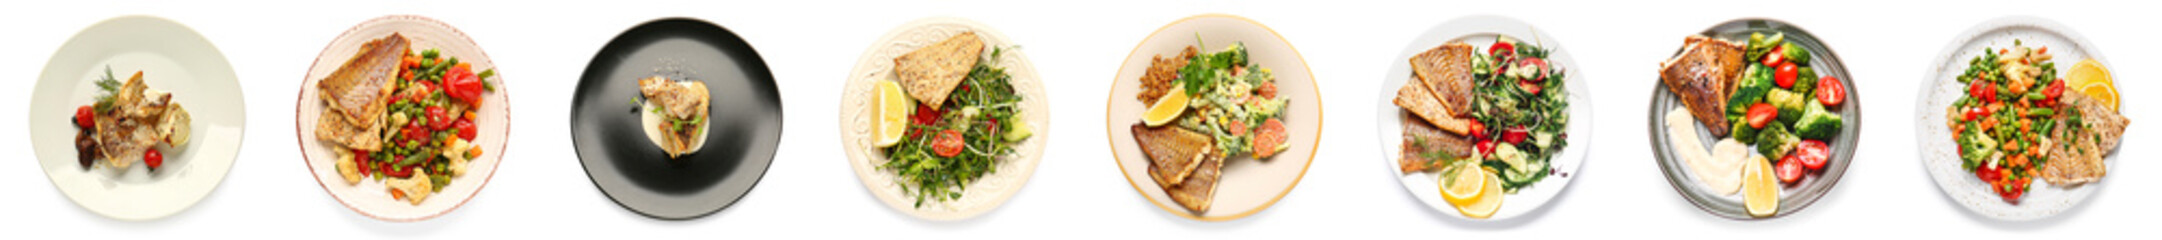 Set of plates with tasty baked cod fish fillet and vegetables on white background, top view